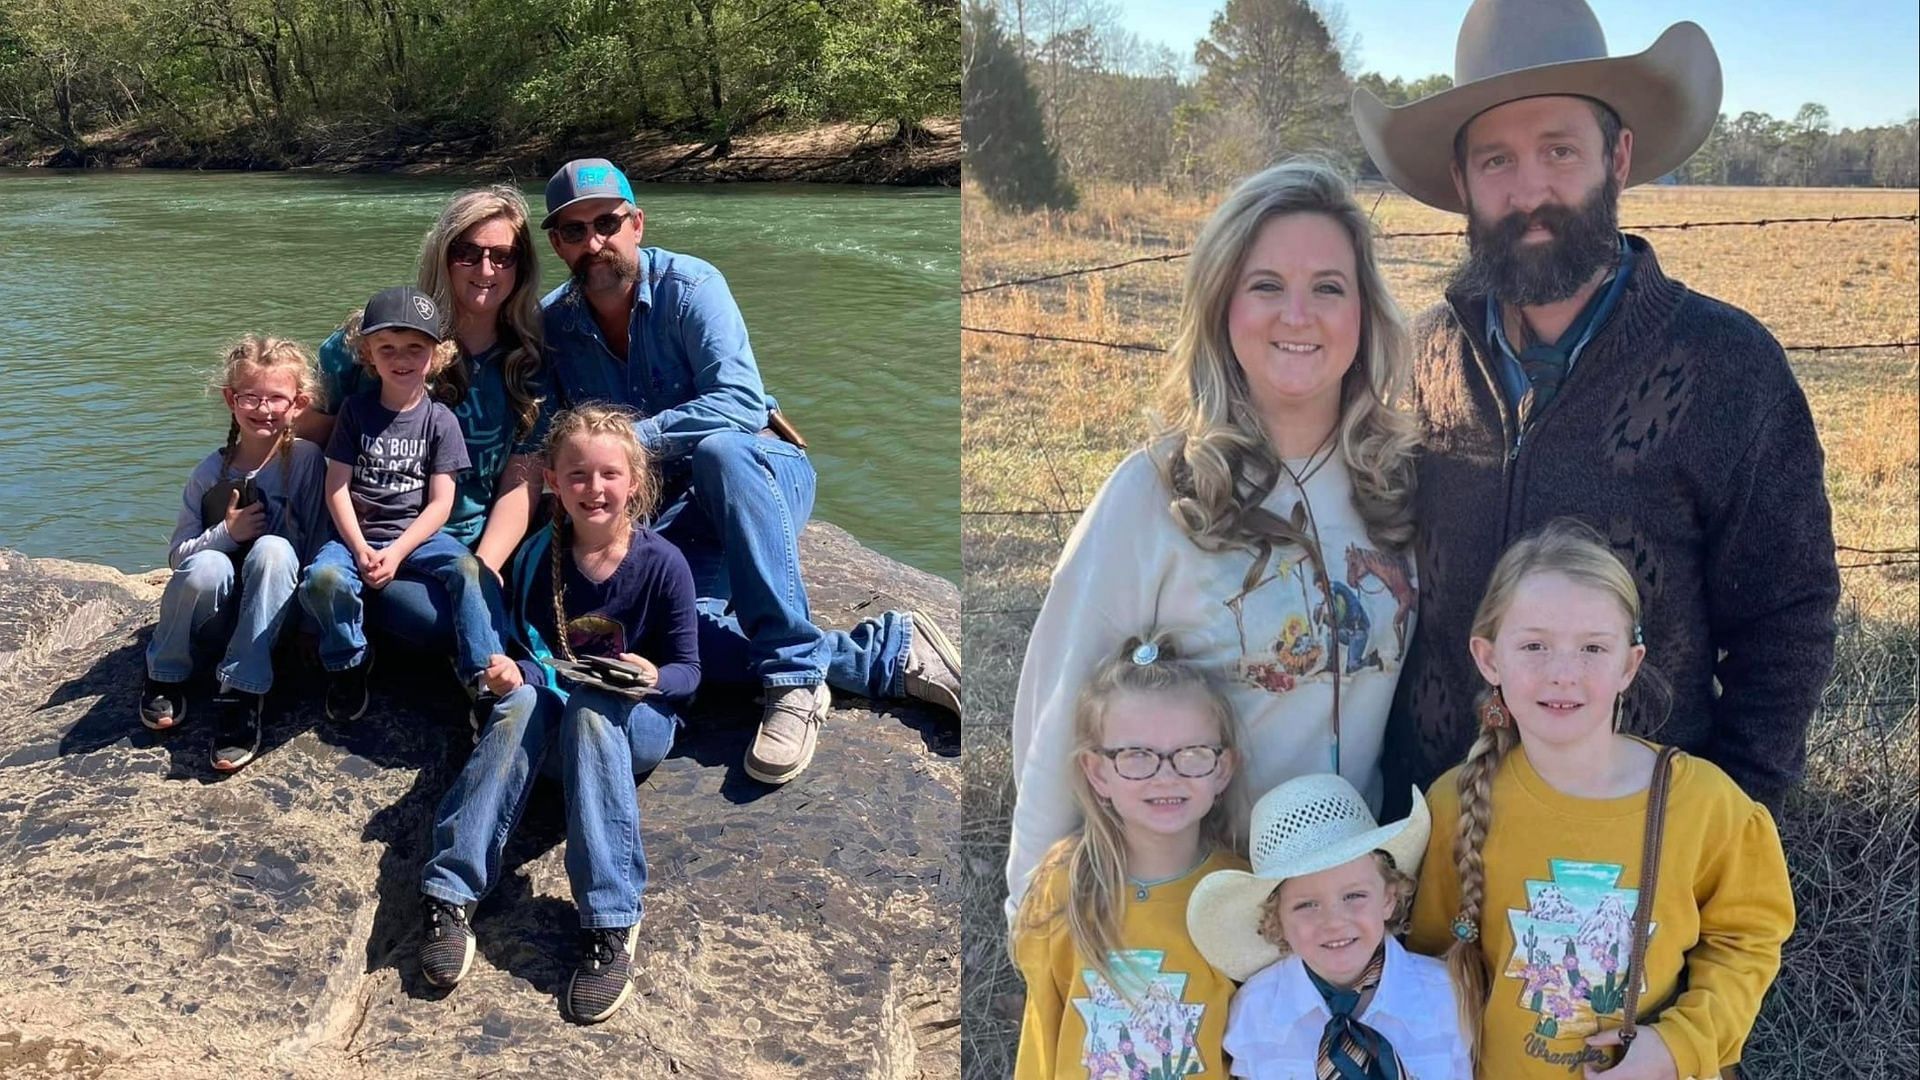 A railroad collision resulted in the death of two little girls and left a beloved pastor and his son hospitalized (Image via Facebook/@CrossRoads Cowboy Church, El Paso, Arkansas)